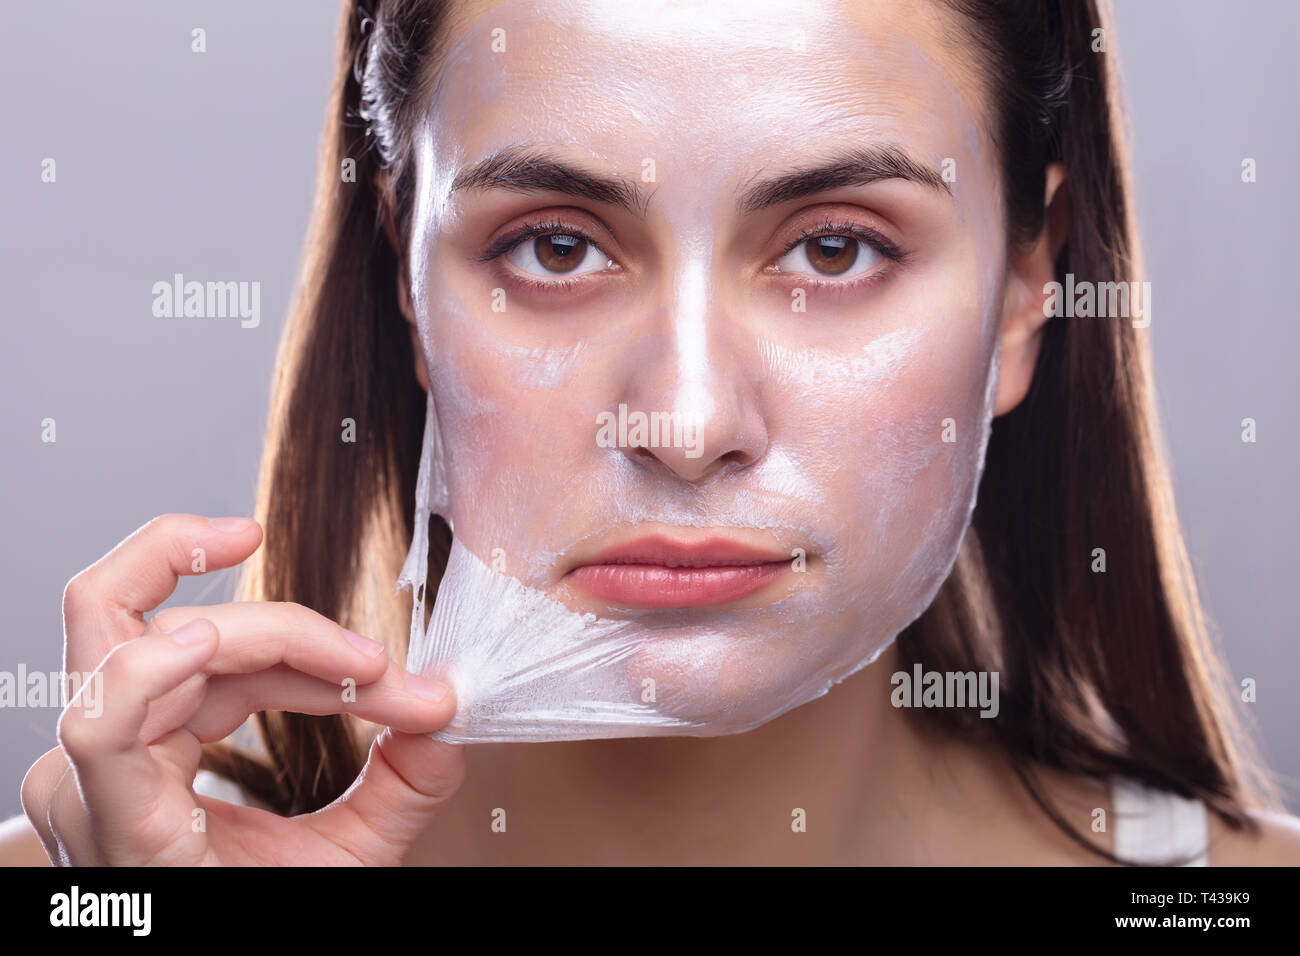 Portrait Of A Beautiful Young Woman Removing Peeling Mask From Her Face Stock Photo